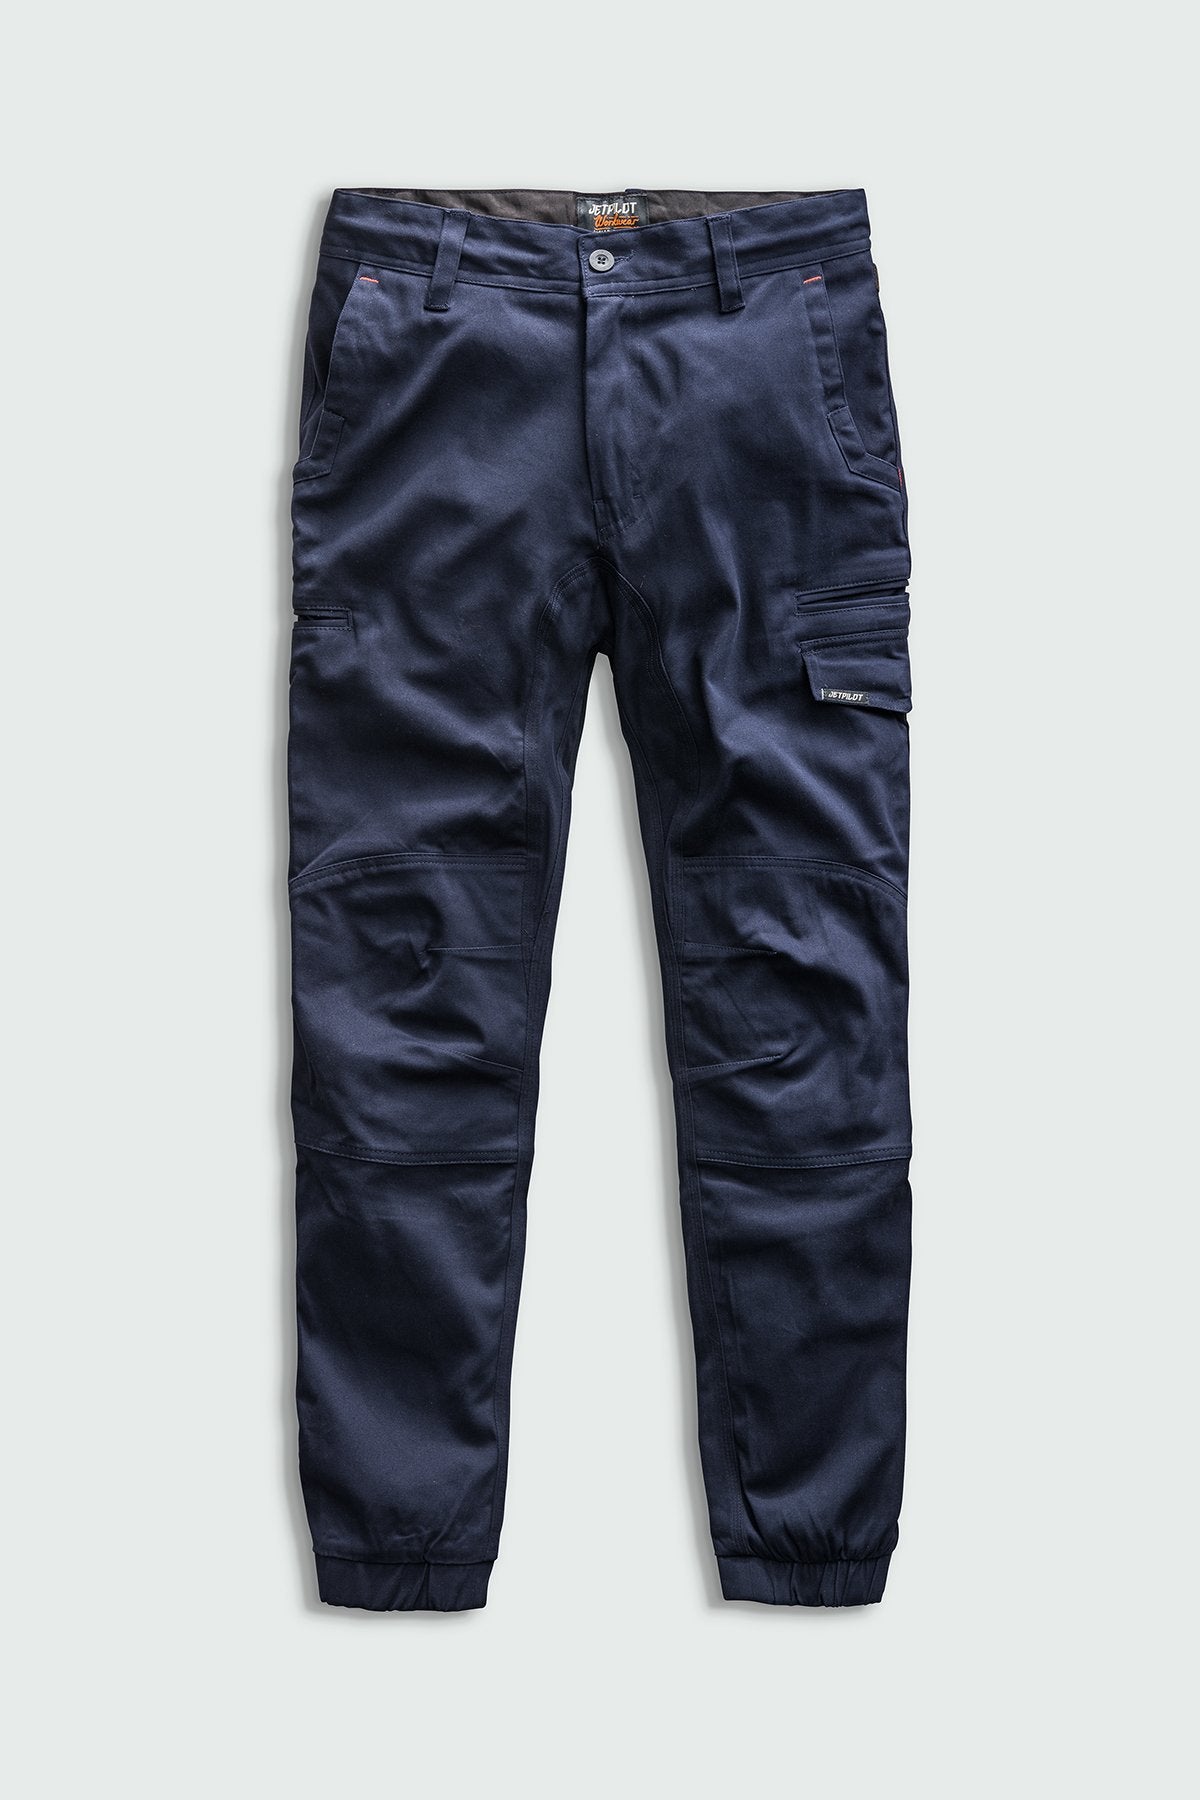 FUELED CUFF PANT - NAVY